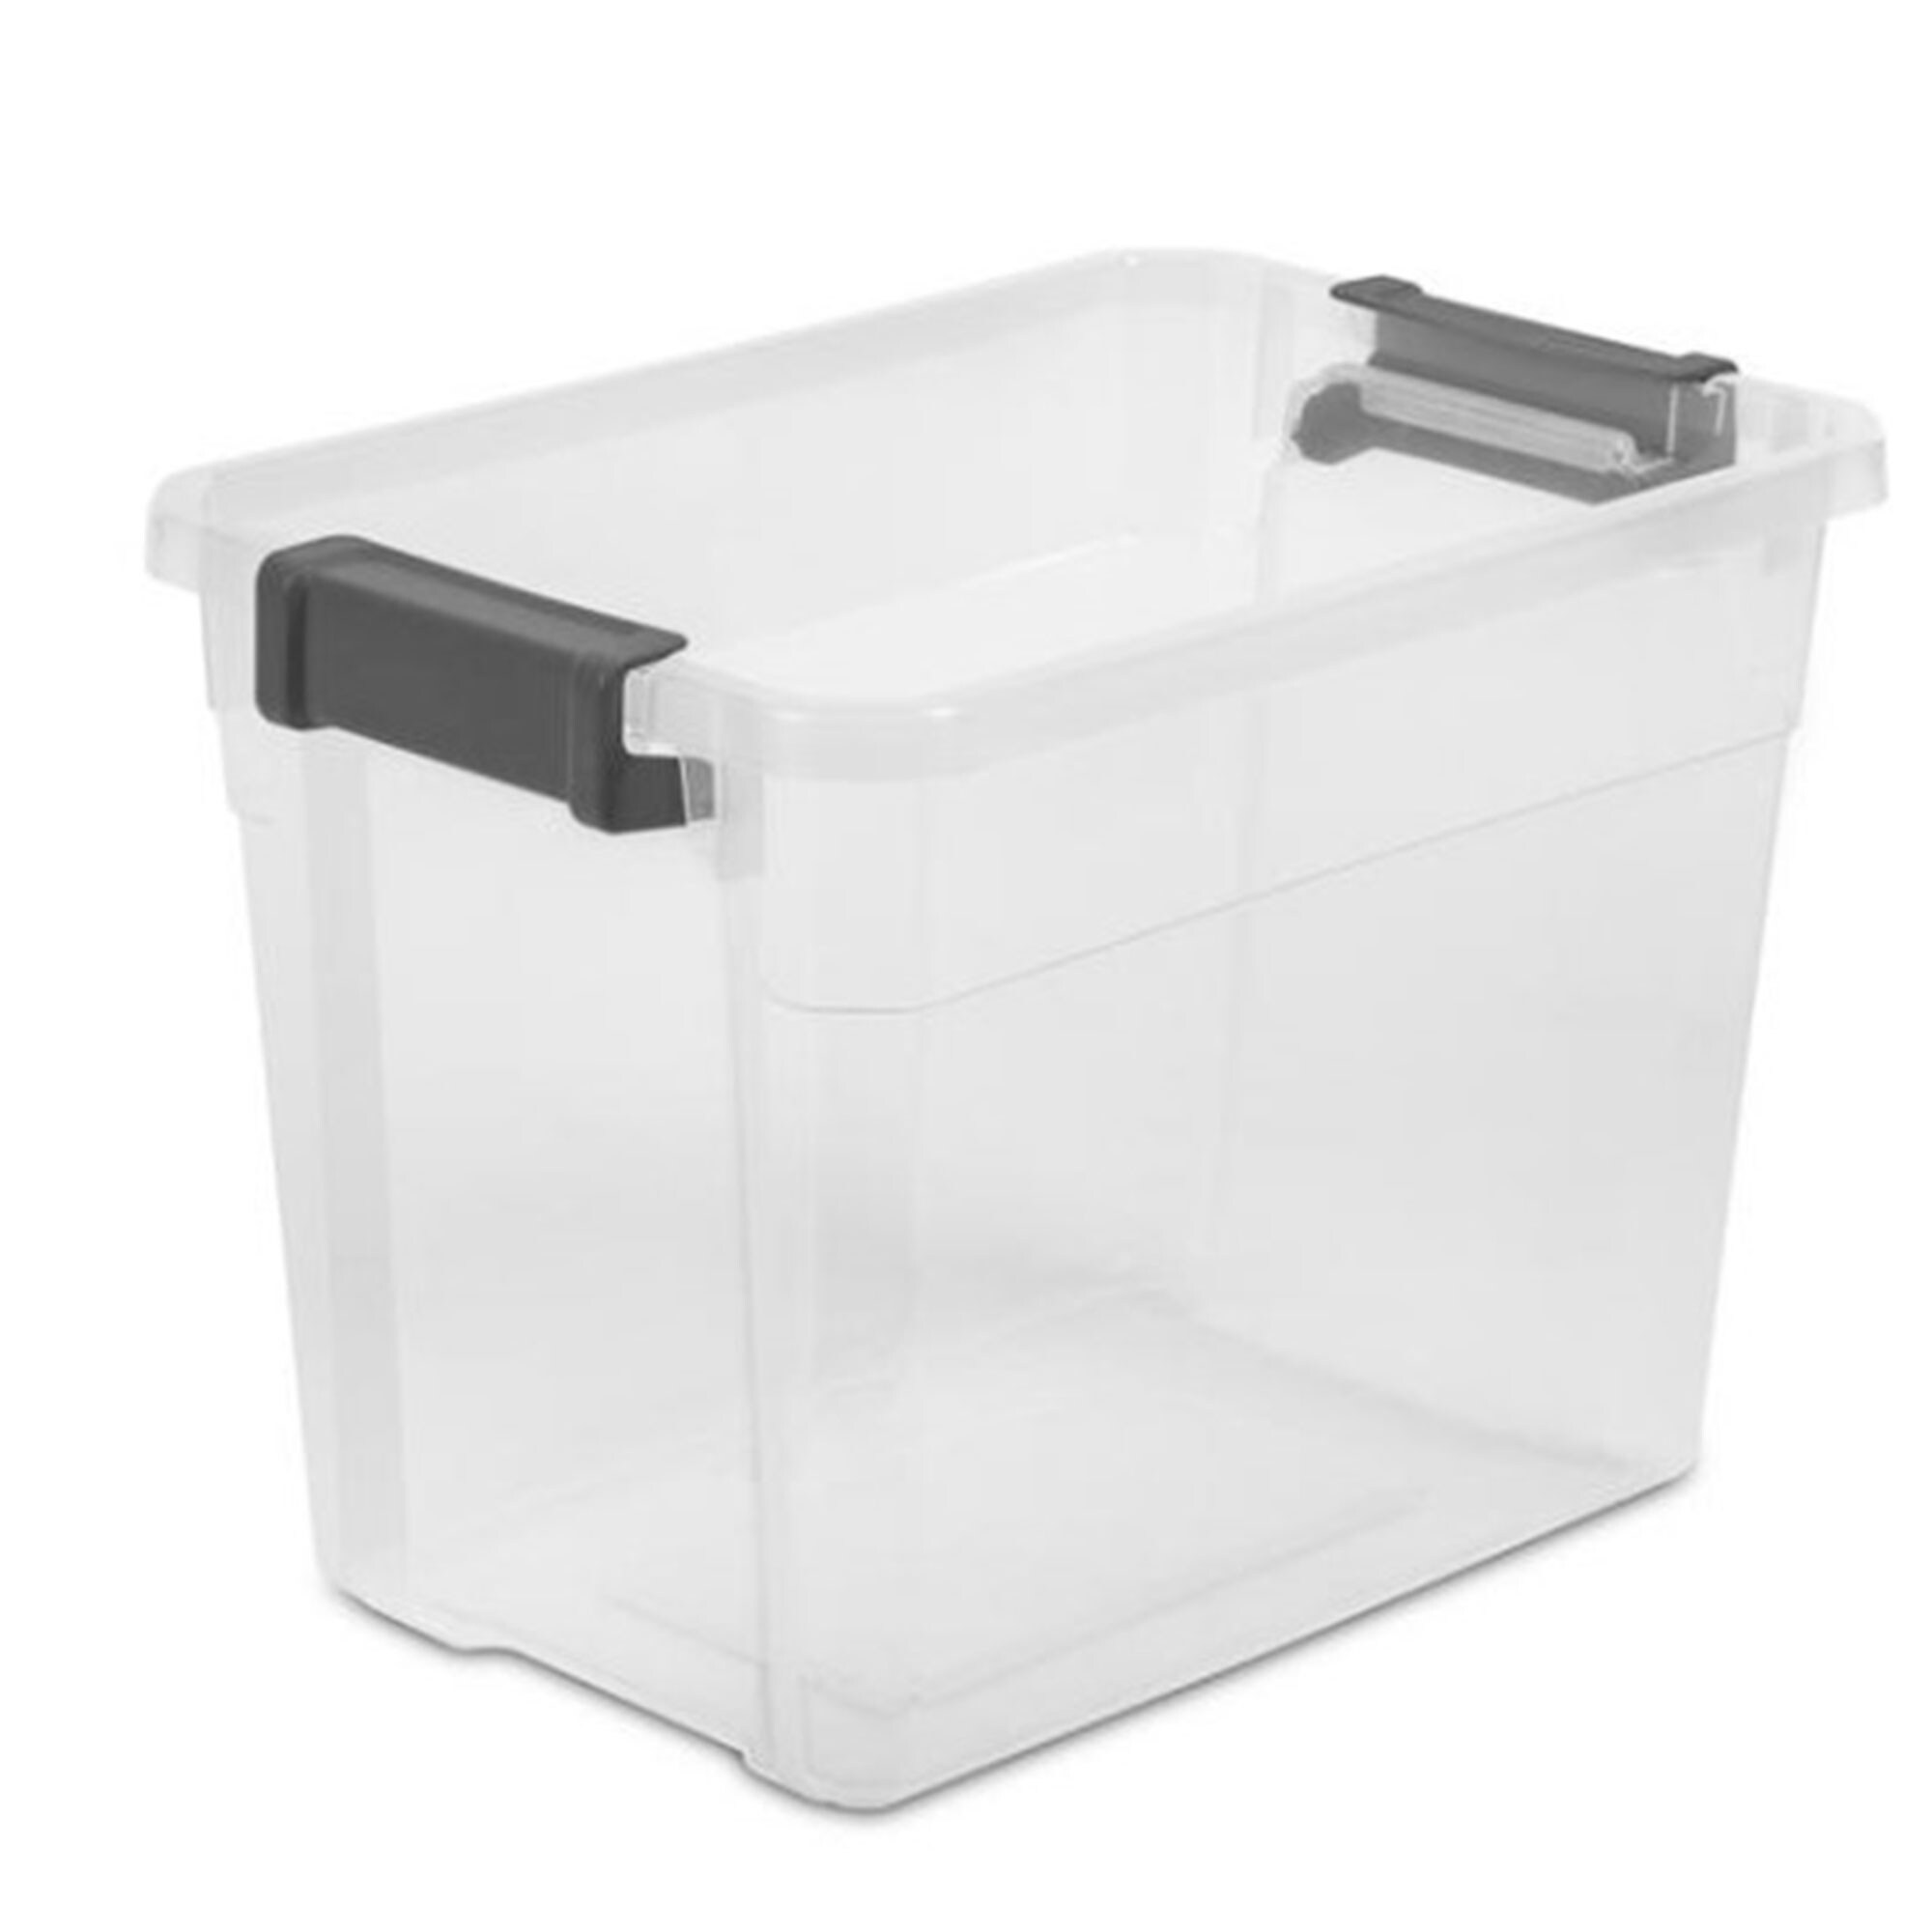 31 qt. Heavy Duty Clear Plastic Stackable Storage Containers (12-Pack)